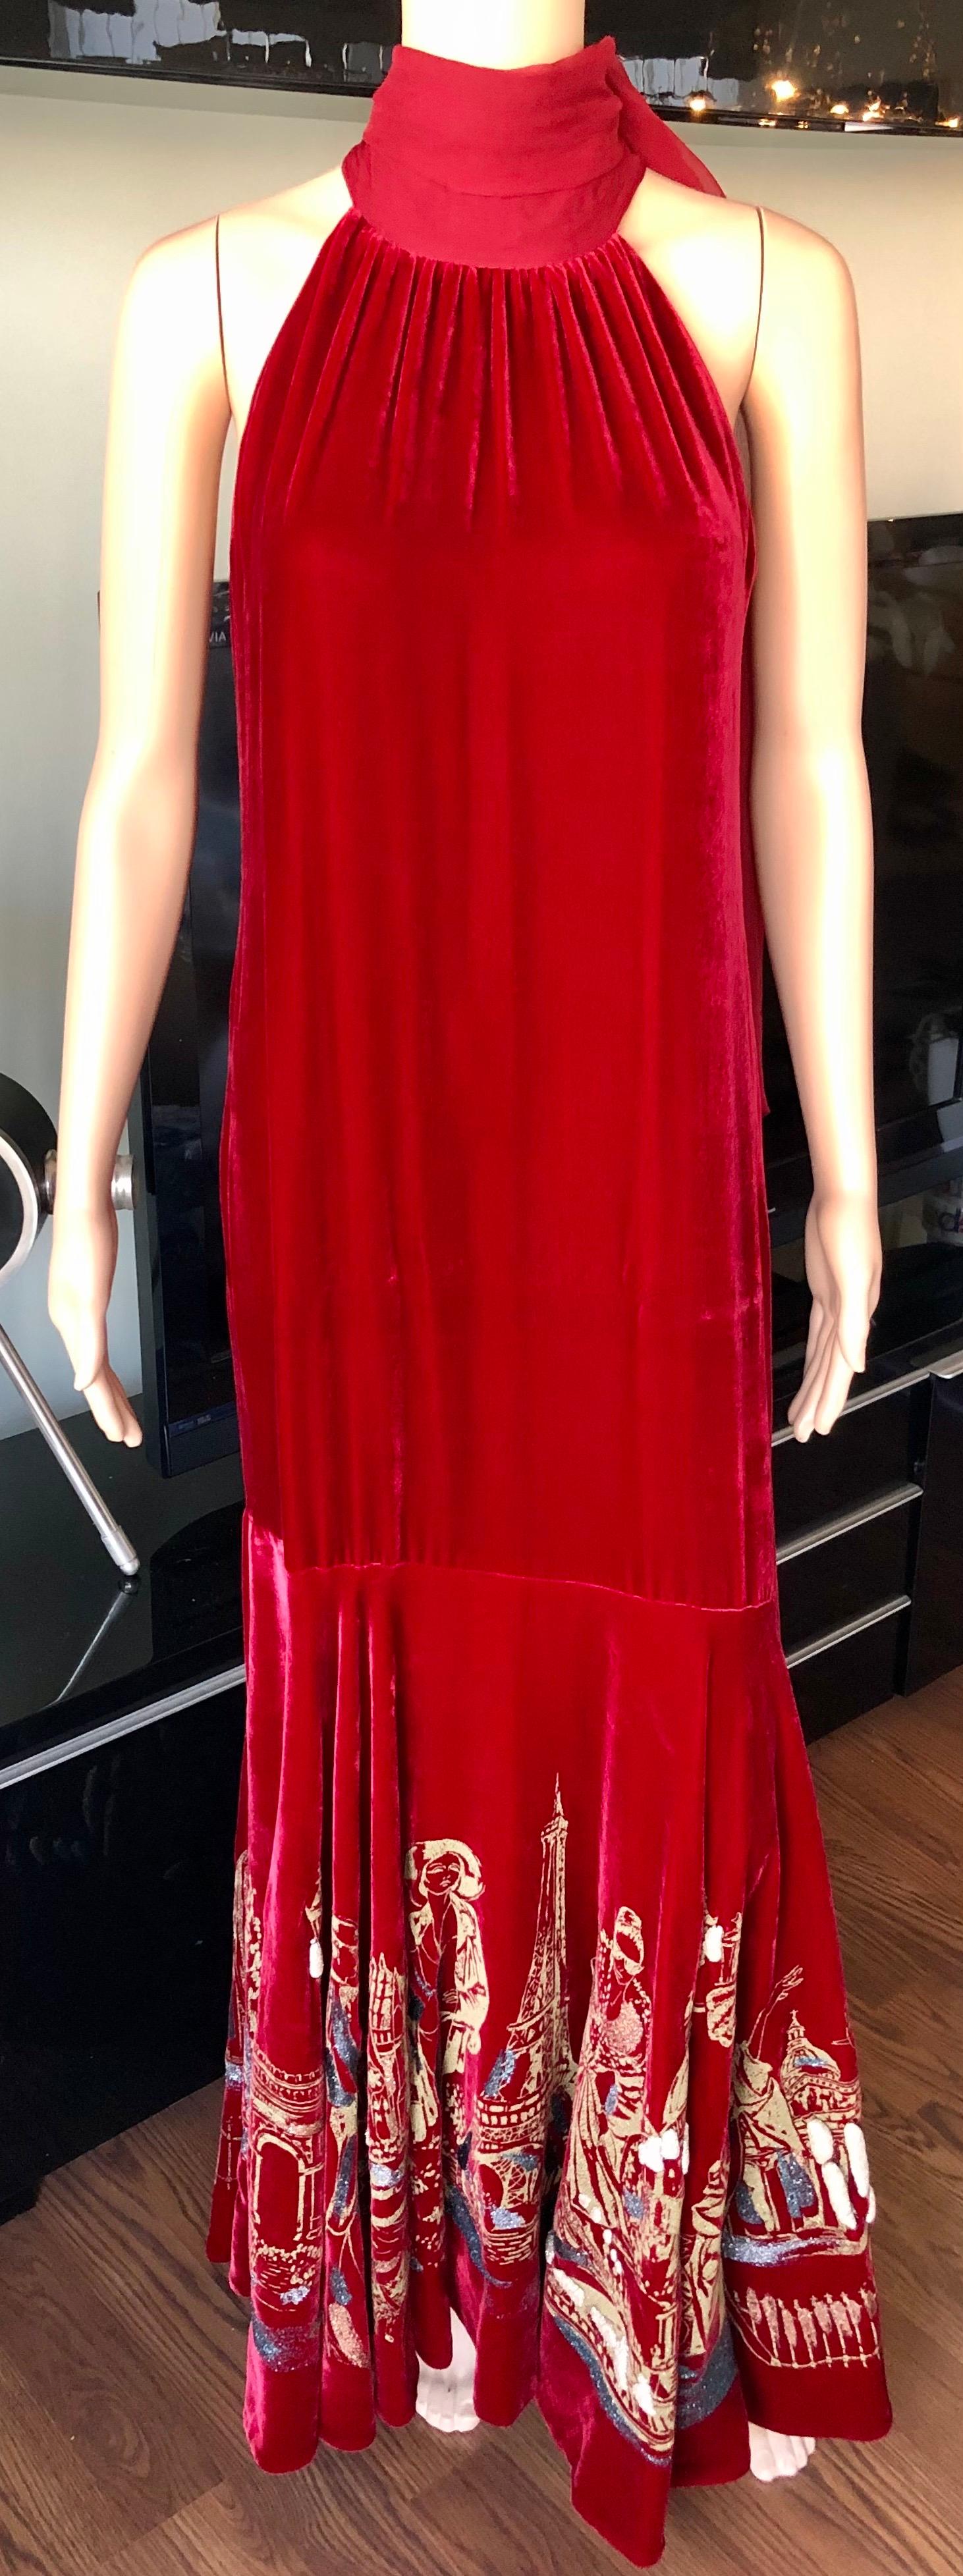 Jean Paul Gaultier Vintage Embellished Landmarks Velvet Maxi Evening Dress Gown IT 44

Jean Paul Gaultier vintage red velvet maxi dress featuring trumpet skirt painted with glitter landmarks, sash tie scarf at neck, fully lined, zipper at